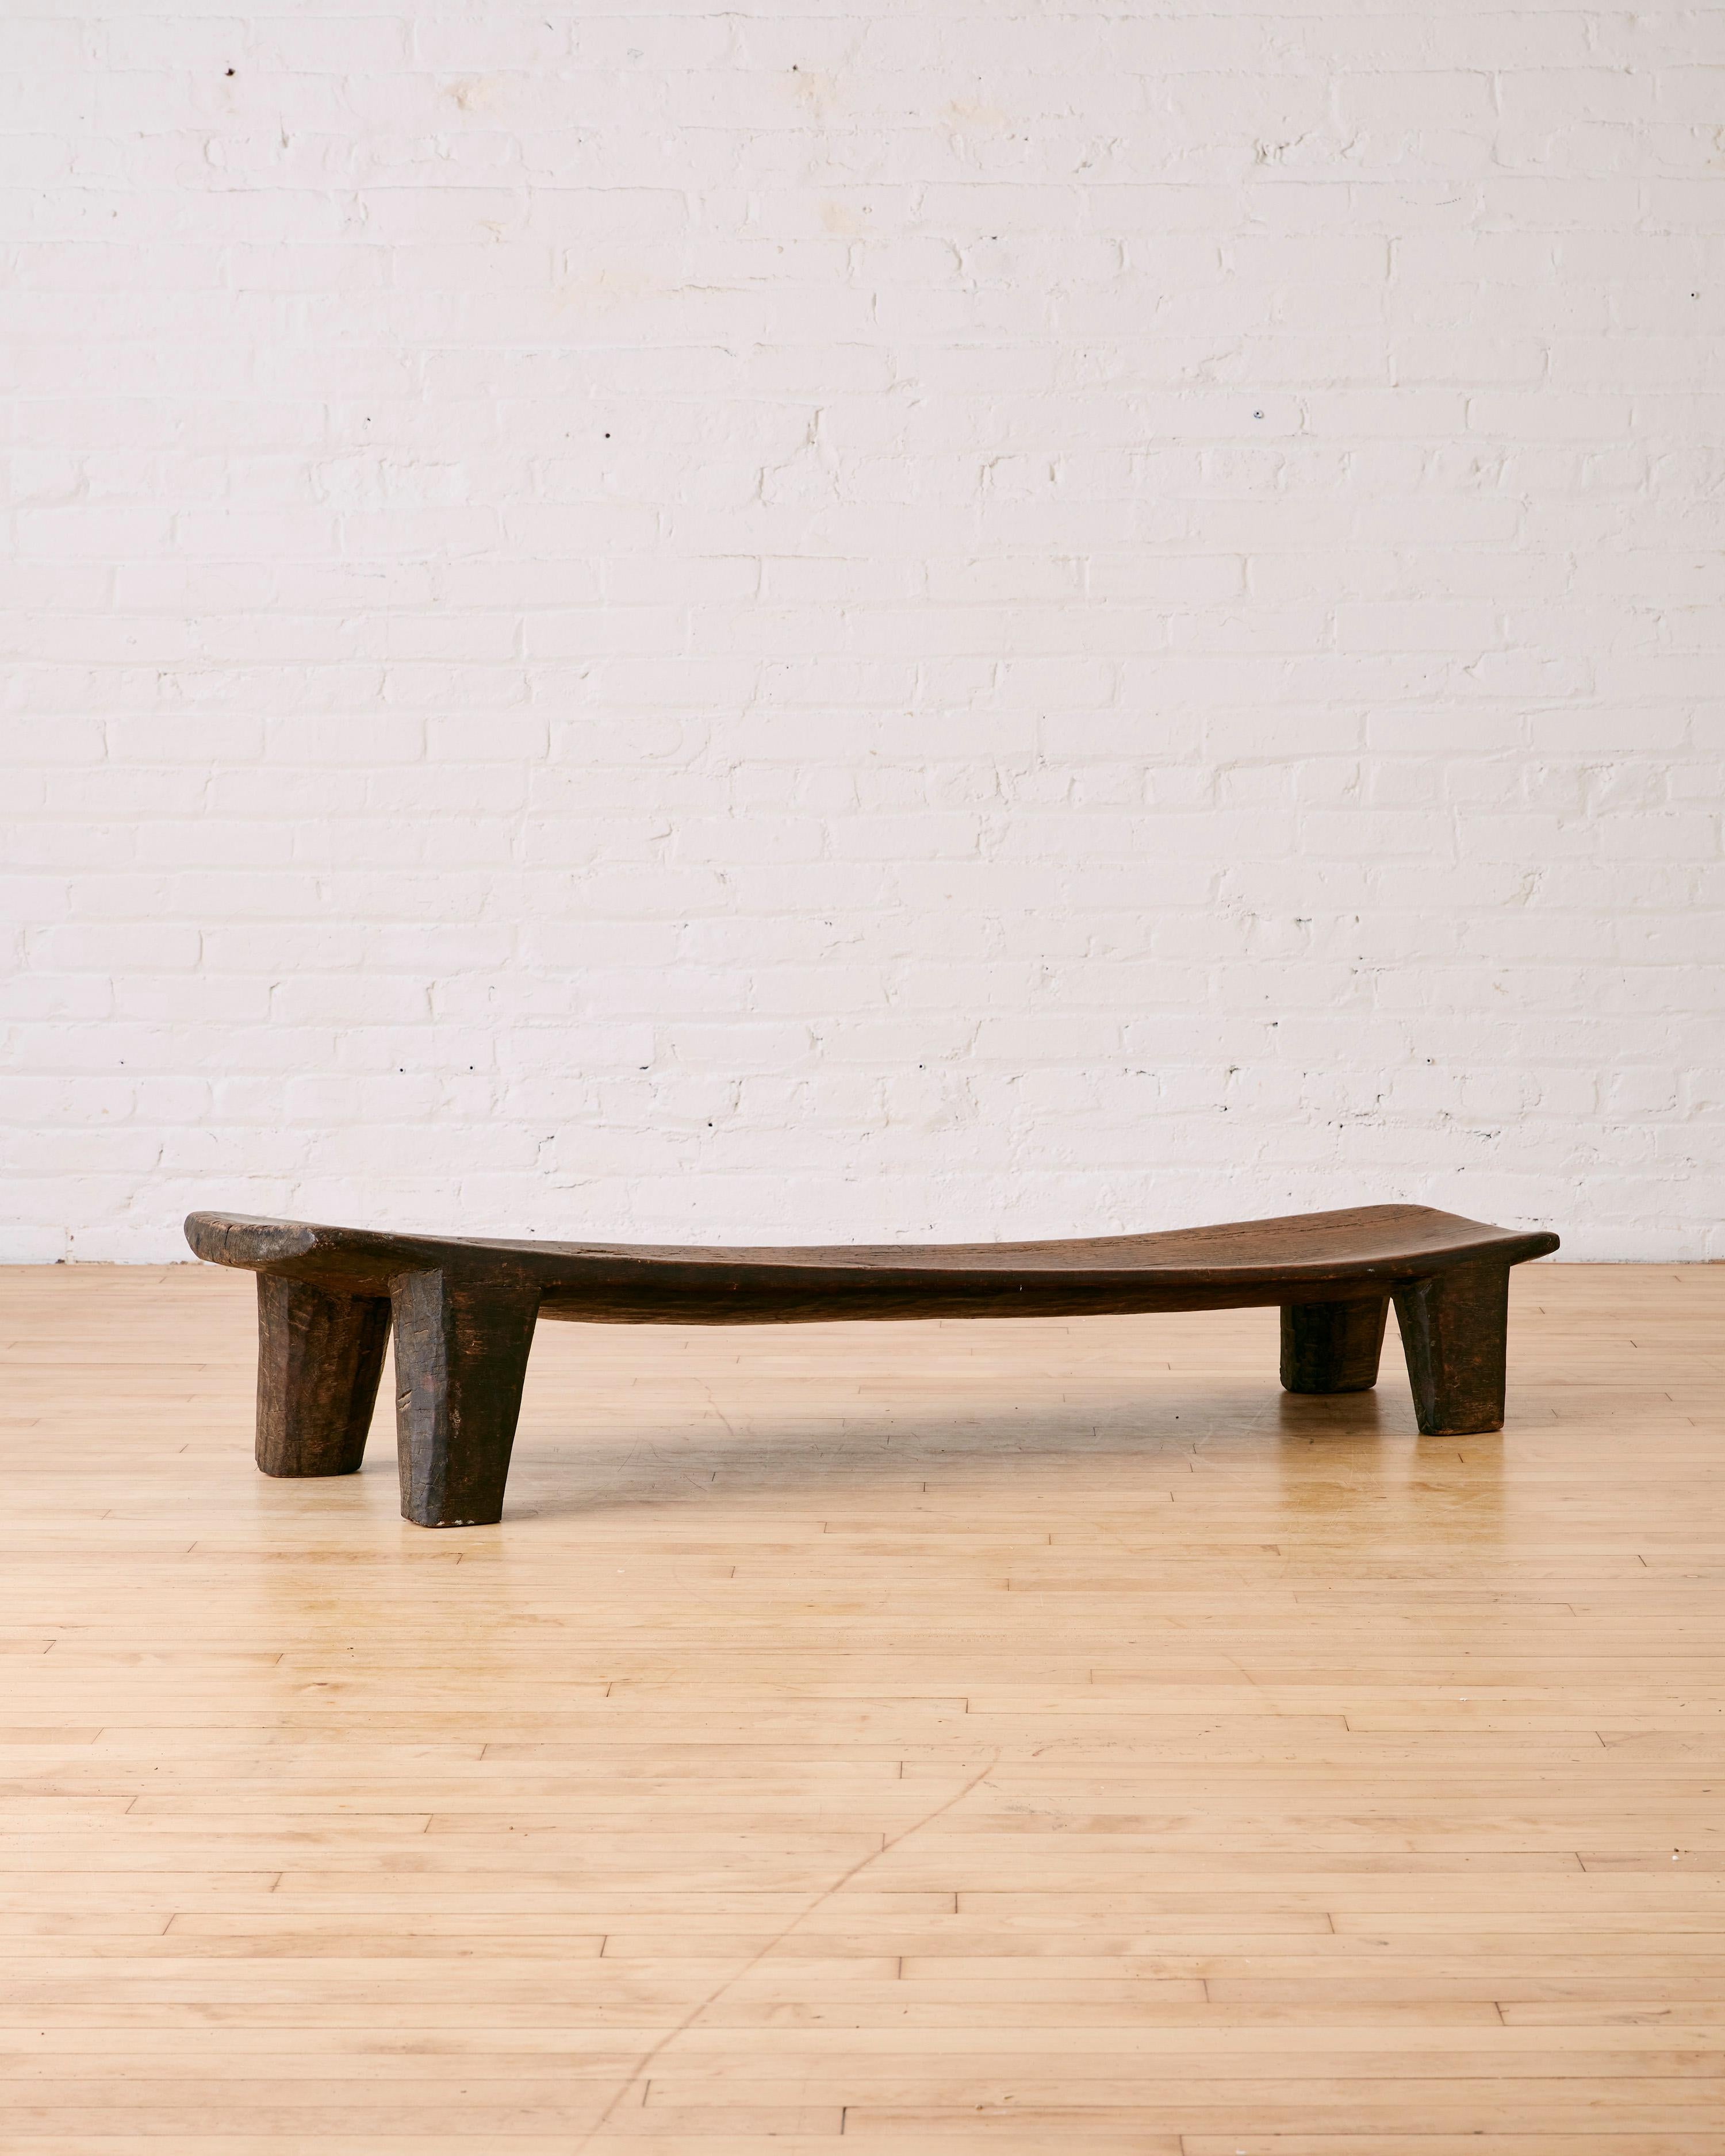 Low Bench Carved by Senufo Artisans in West Africa. 

Dimensions: 10.5